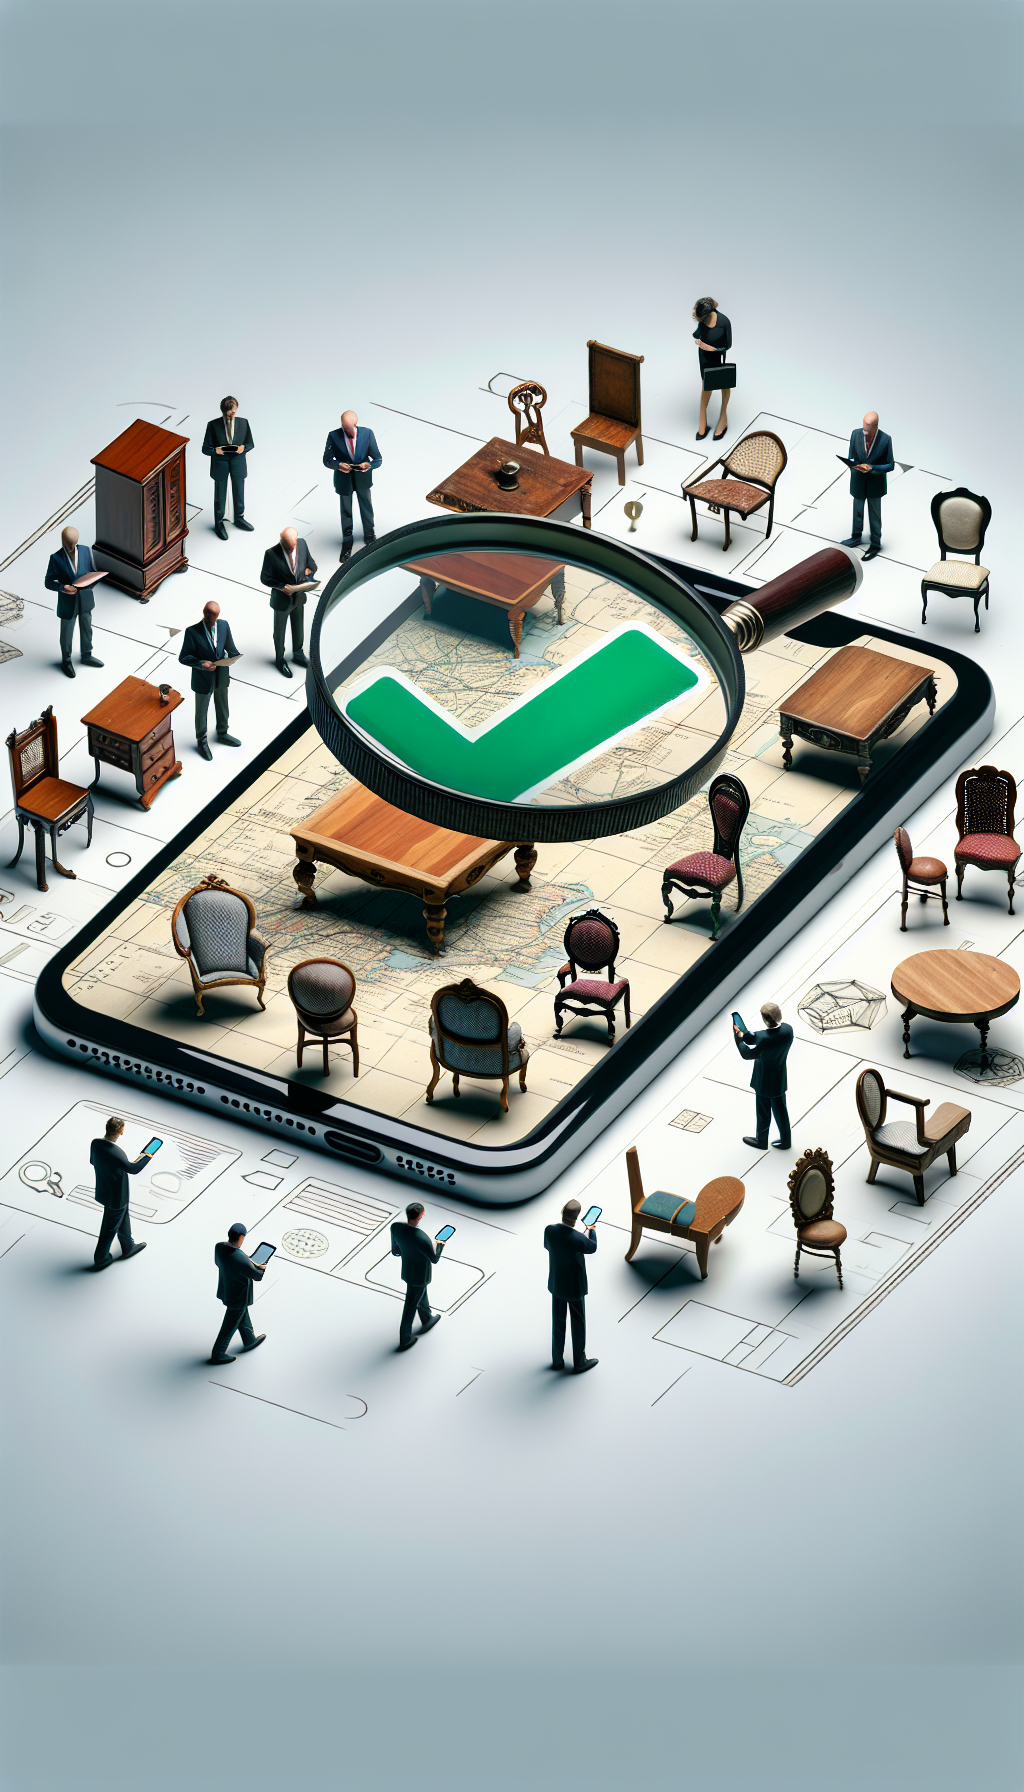 An illustration featuring a magnifying glass hovering over a stylized map dotted with vintage chairs and tables, under which professional appraisers with badges of certification mill about. The magnifying glass reflects a checkmark symbol, signifying trust, while the map connects to a smartphone showing 'antique furniture appraisal near me', blending modern tech with traditional expertise.